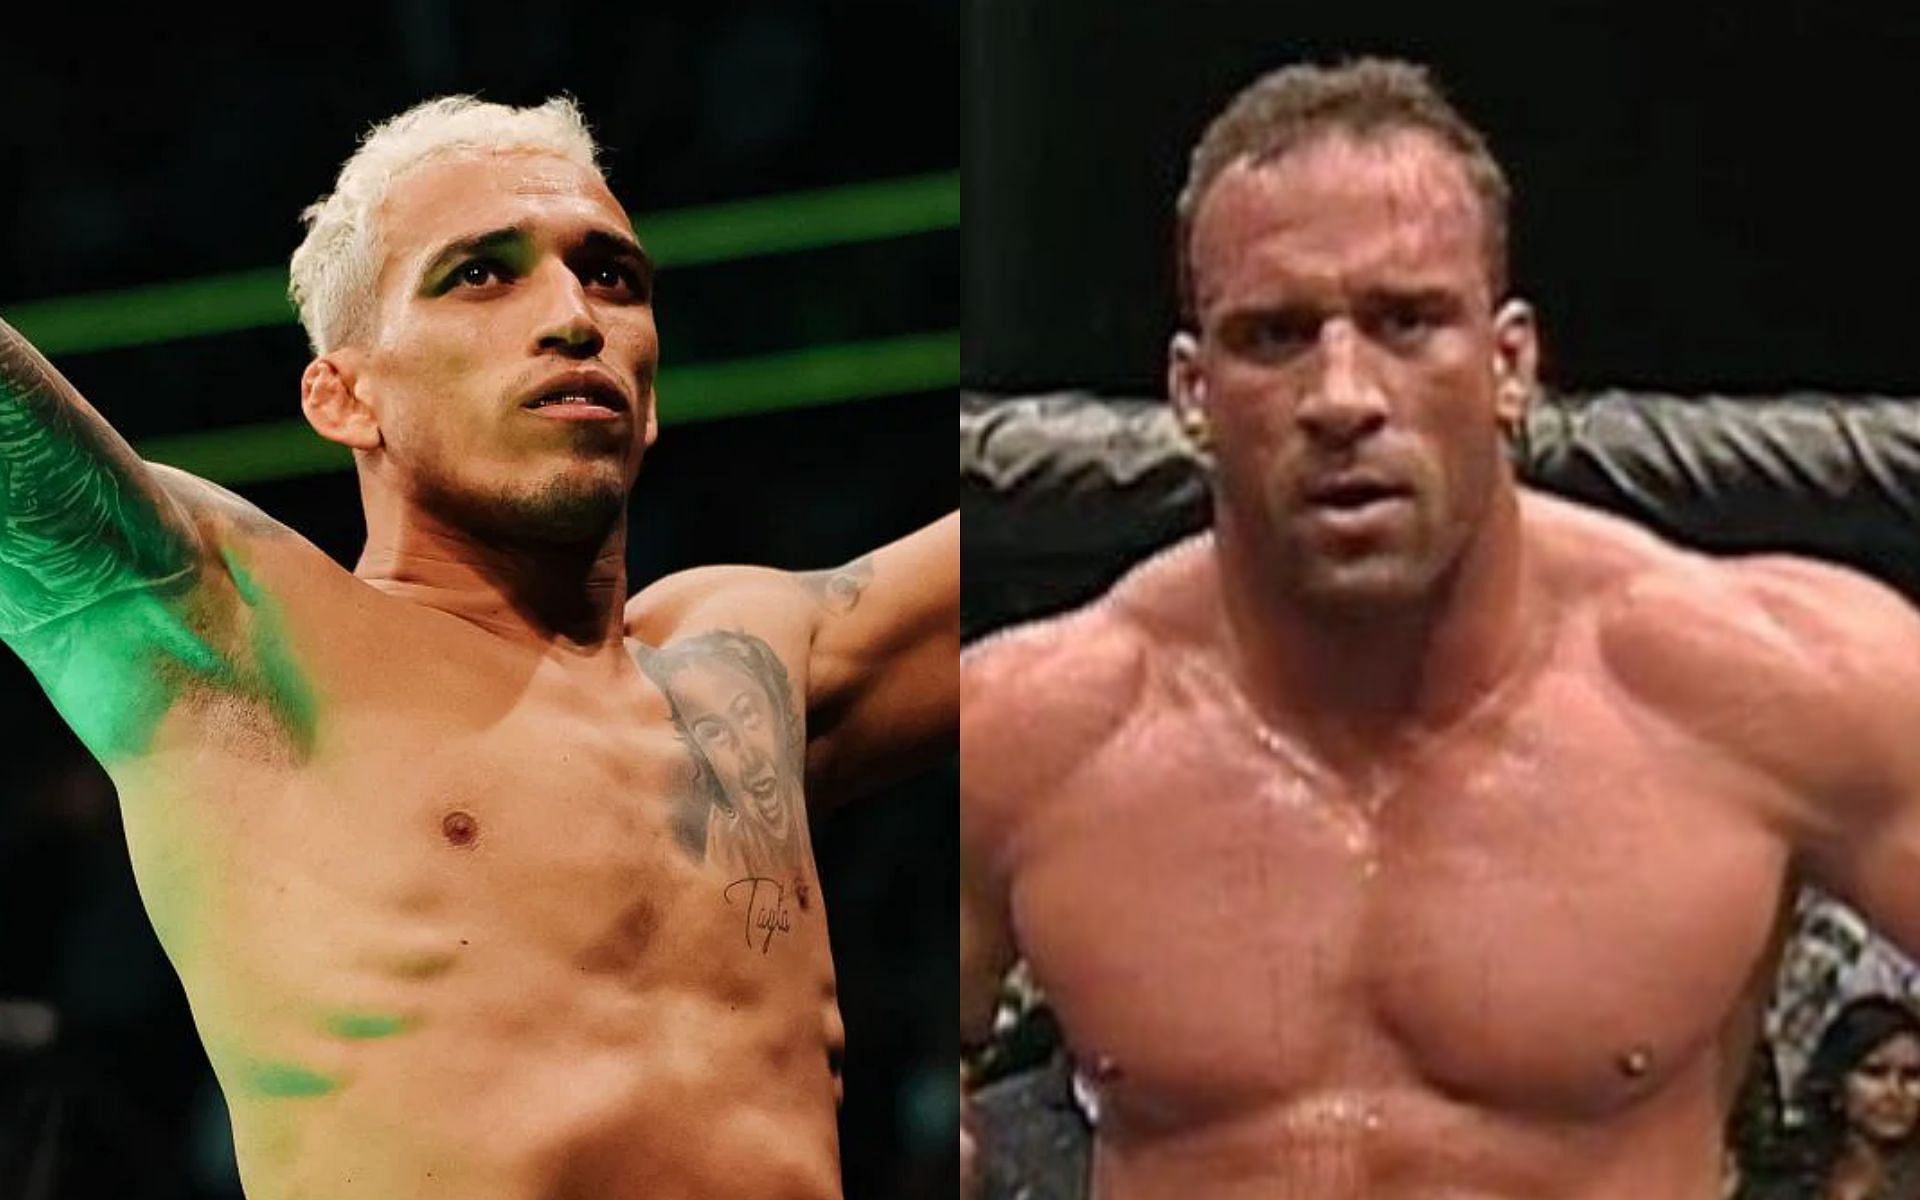 Charles Oliveira (left), Mark Coleman from his Instagram (right)